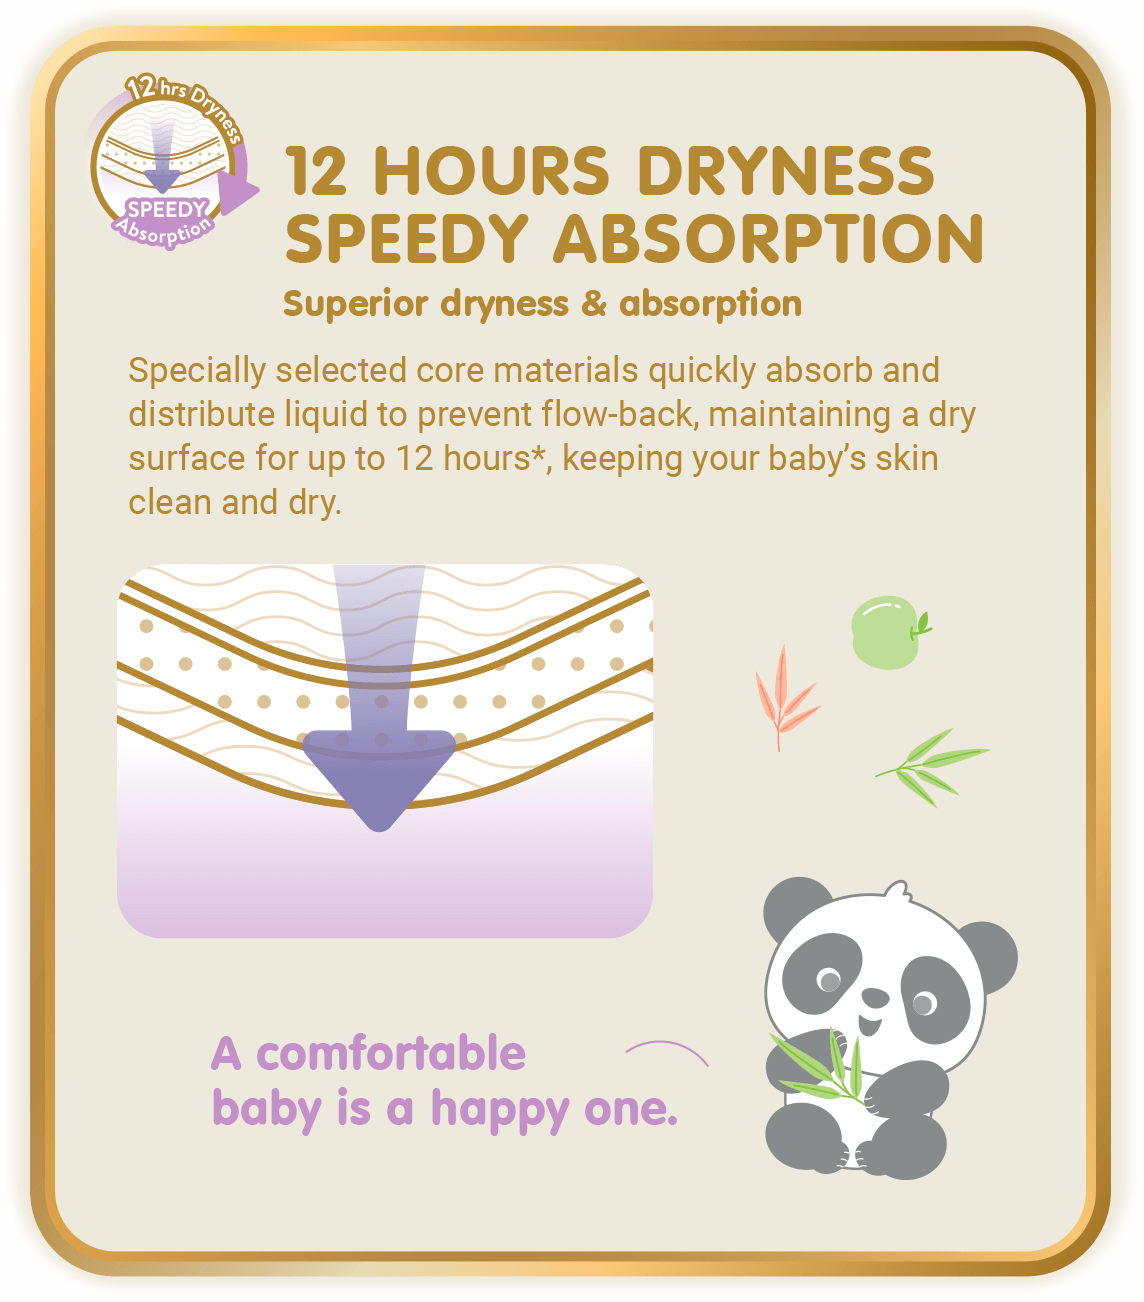 12Hours Dryness, Speedy Absorption, Superior dryness & absorption: Specially selected core materials quickly absorb and distribute liquid to prevent flow-back, maintaining a dry surface for up to 12 hours*, keeping your baby’s skin clean and dry. (*Only applicable to Skinature Pants by Drypers.)